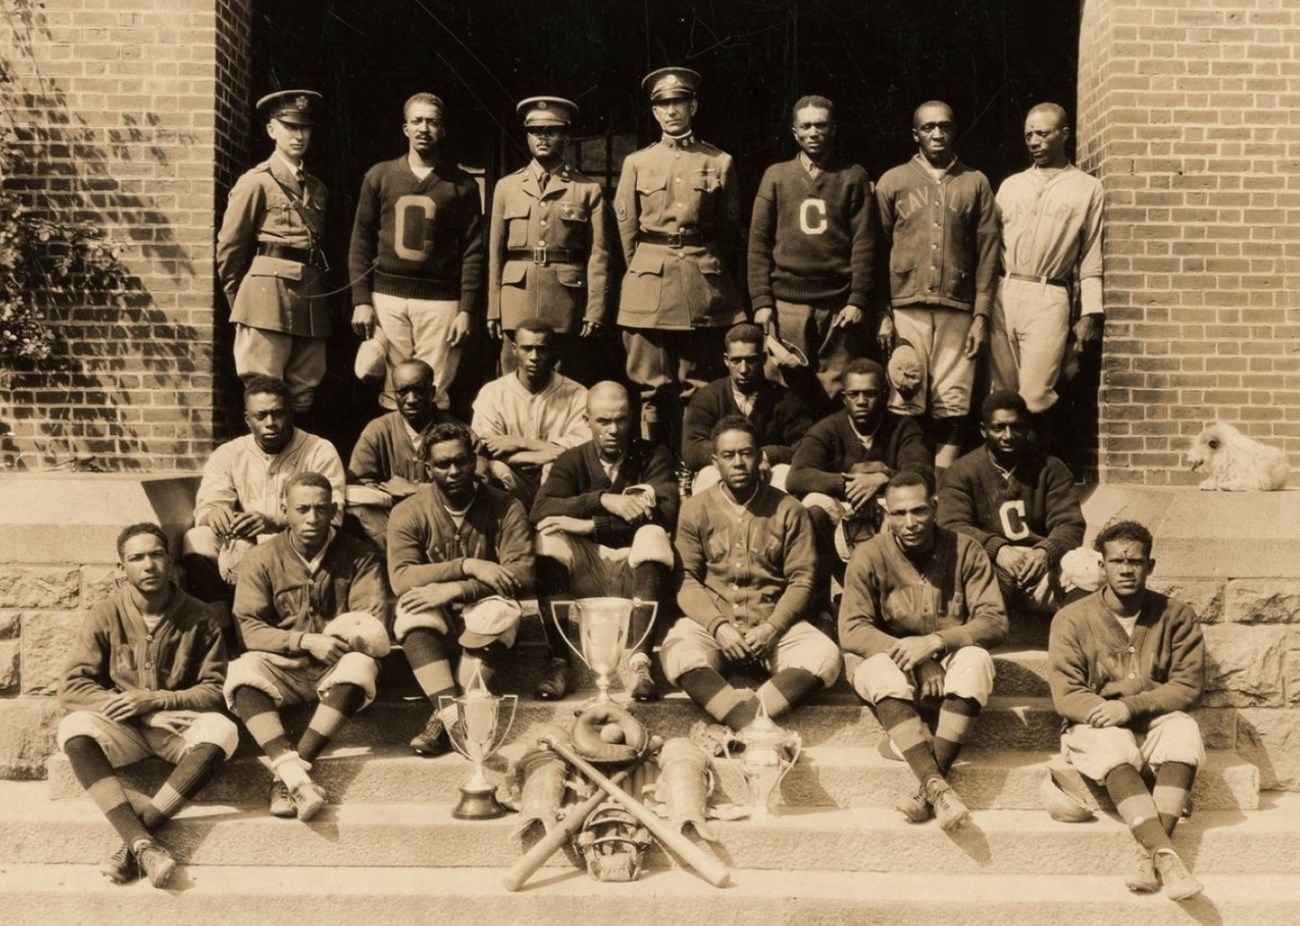 Image features 20 figures of which 18 are African American including: six in "C" sweaters; eight wearing a gray button up jacket w/"Cavalry" embroidered across chest; three wearing jerseys reading "Cavalry" and one of the three officers in top row. Photo